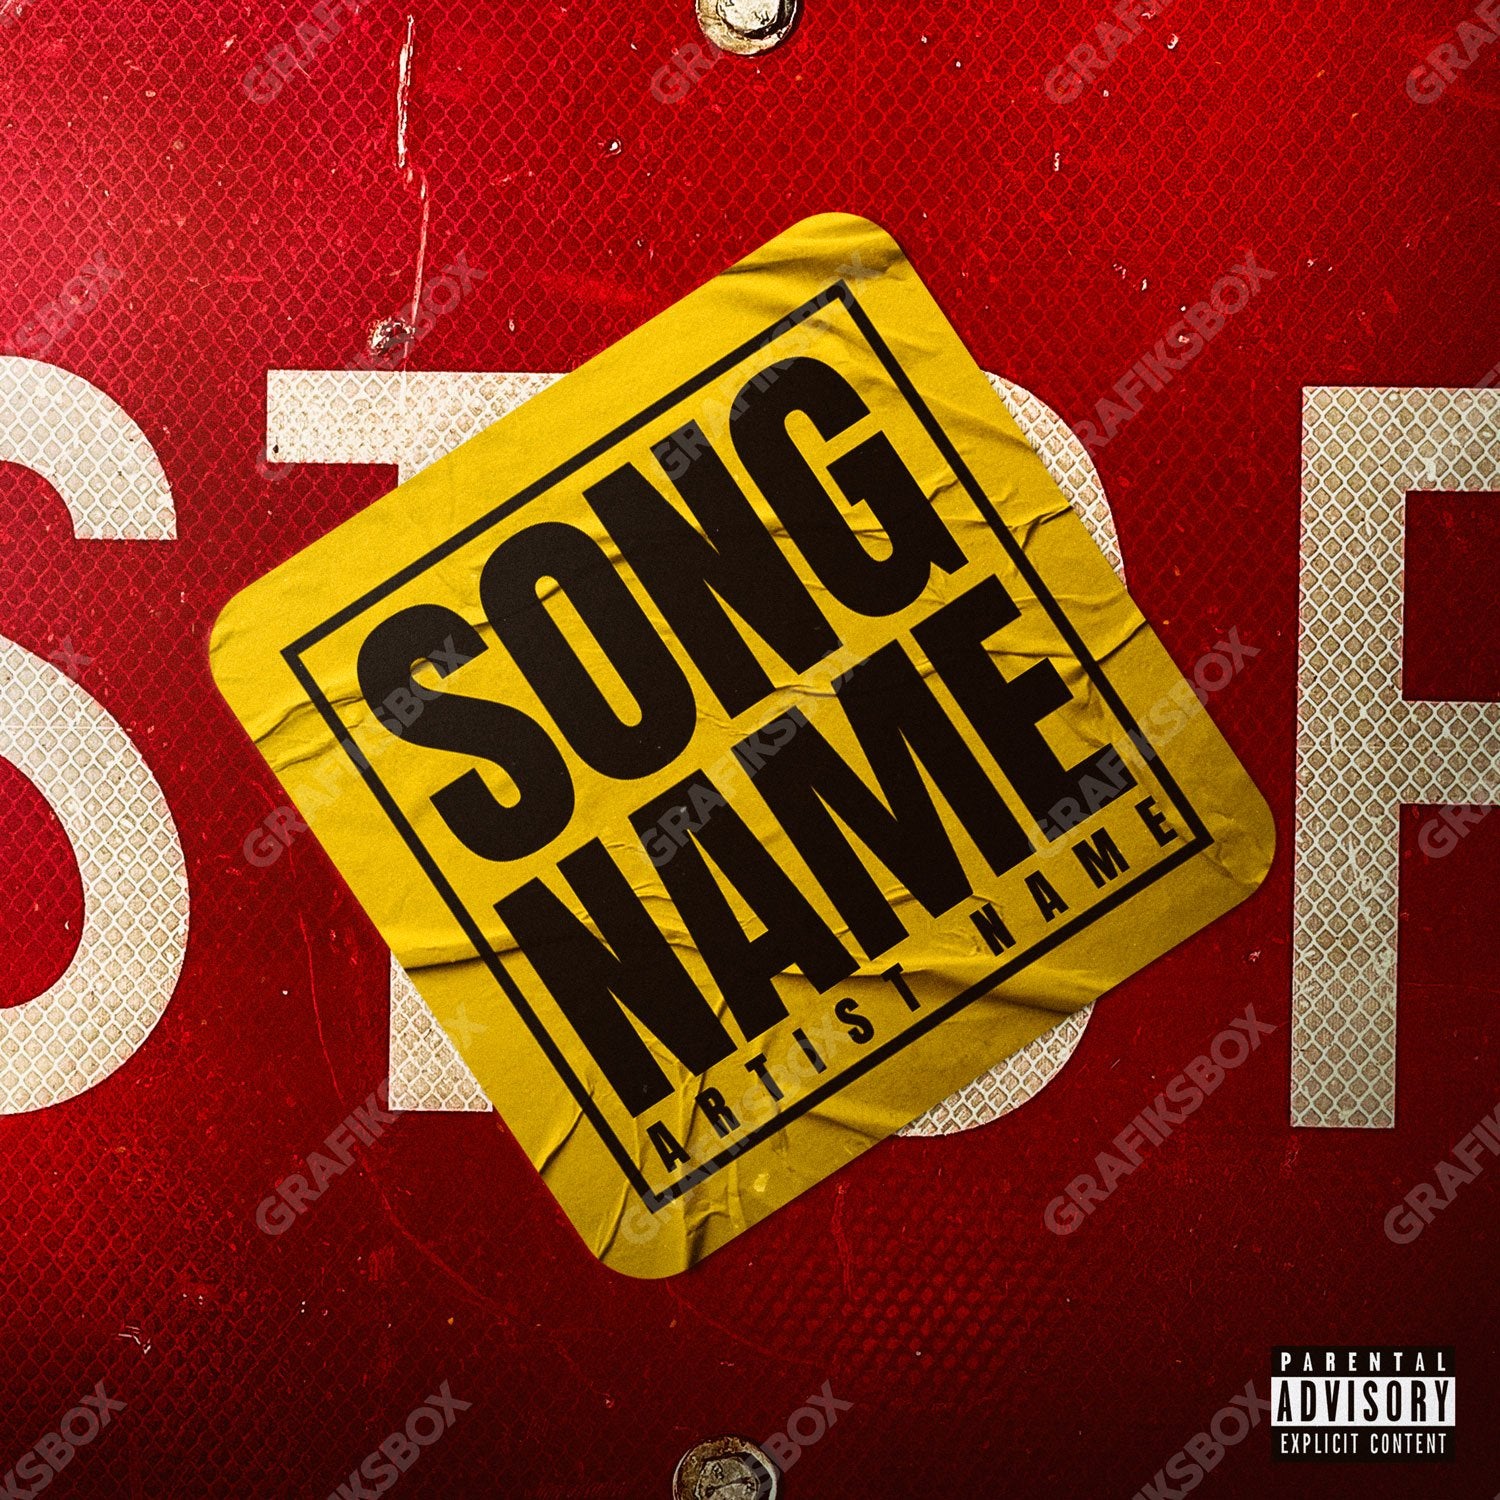 Stop premade cover art